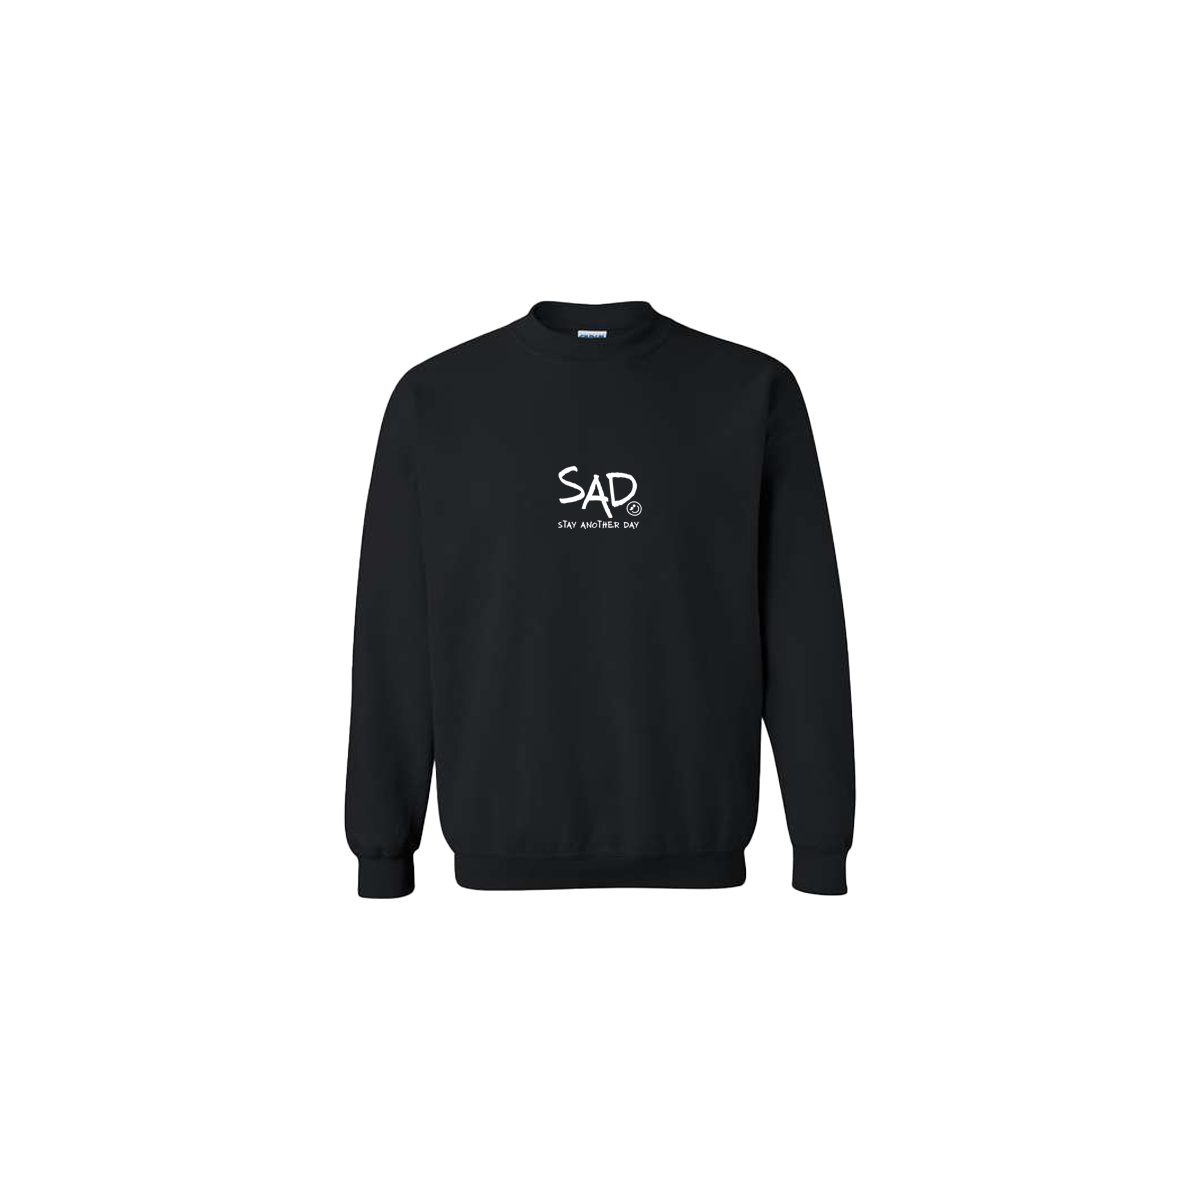 Stay Another Day - SAD Logo Embroidered Black Crewneck - Mental Health Awareness Clothing